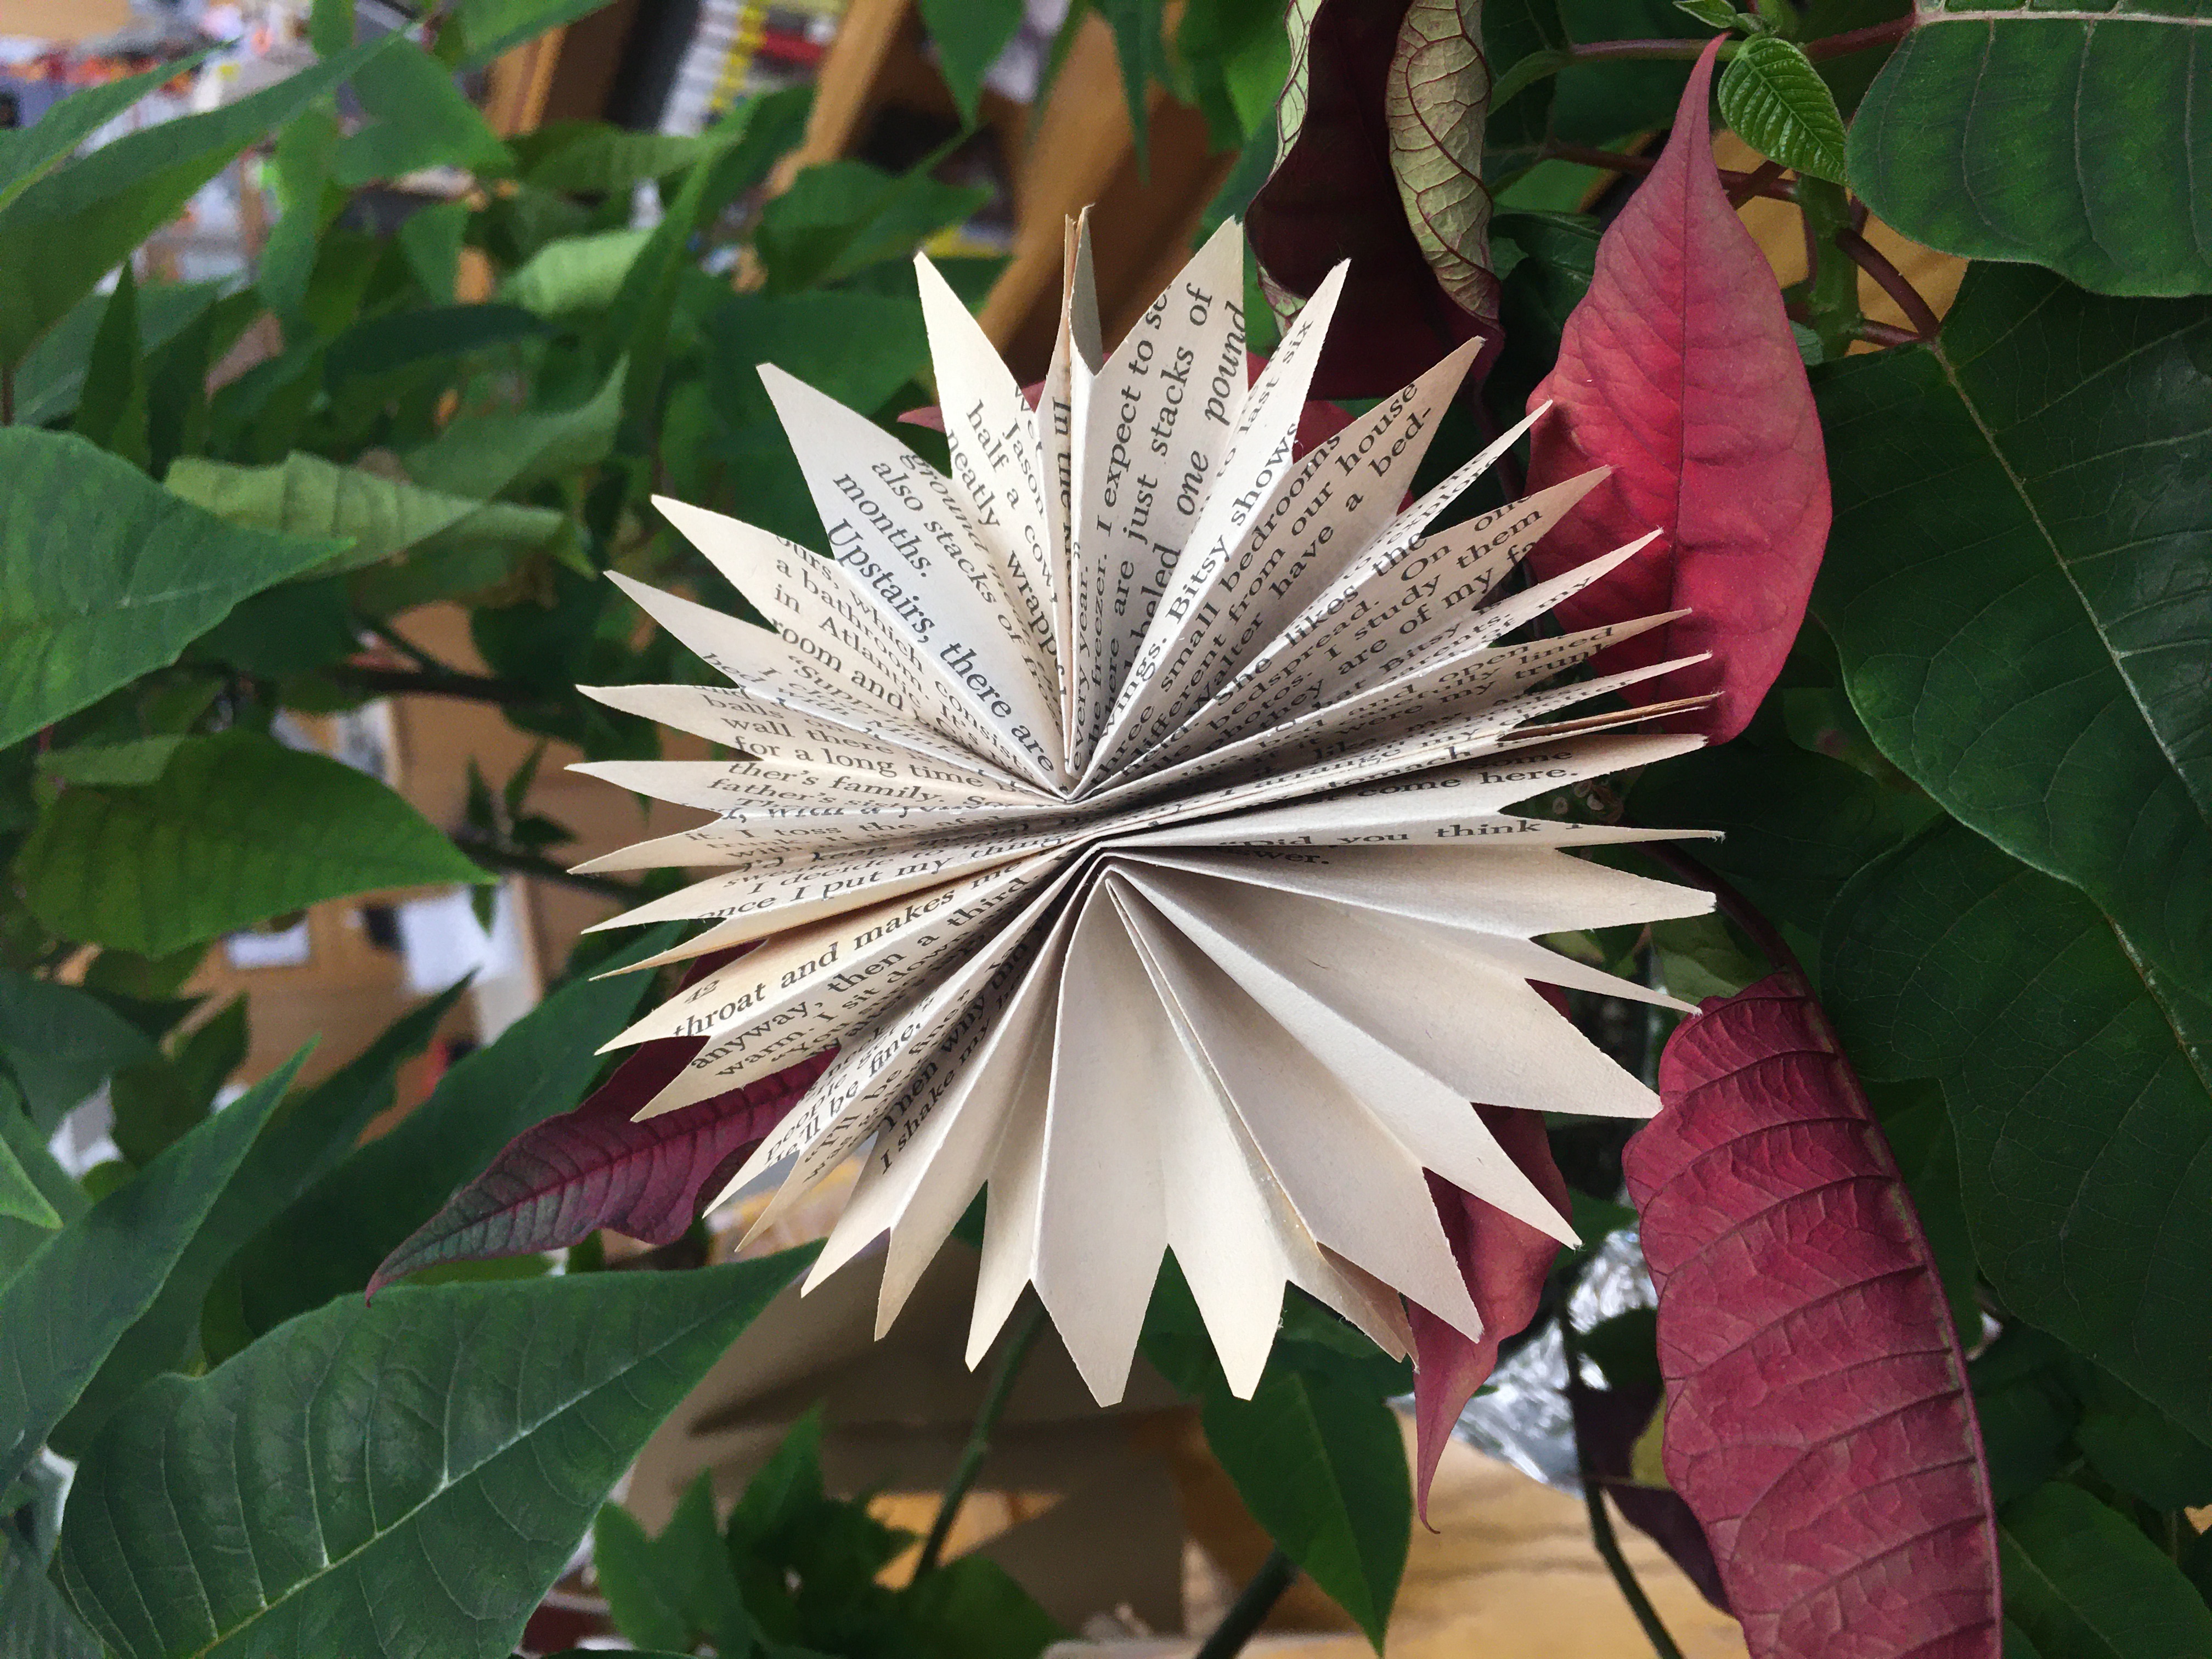 Close-up of a printed page from a book, folded into a star, leaning against a dark green poinsettia.